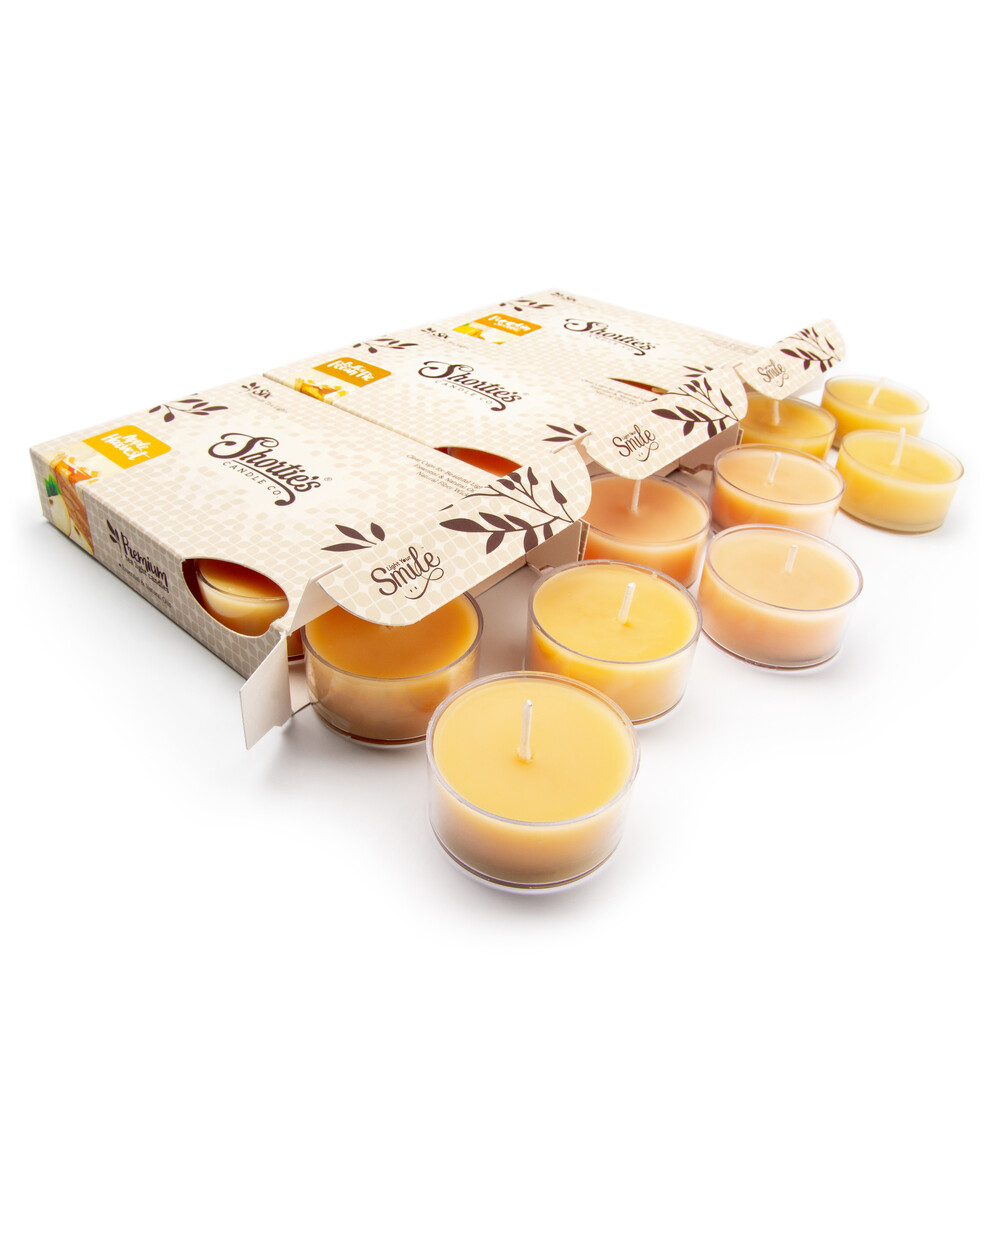 Fall Tealight Candles Variety Pack - Shortie's Candle Company